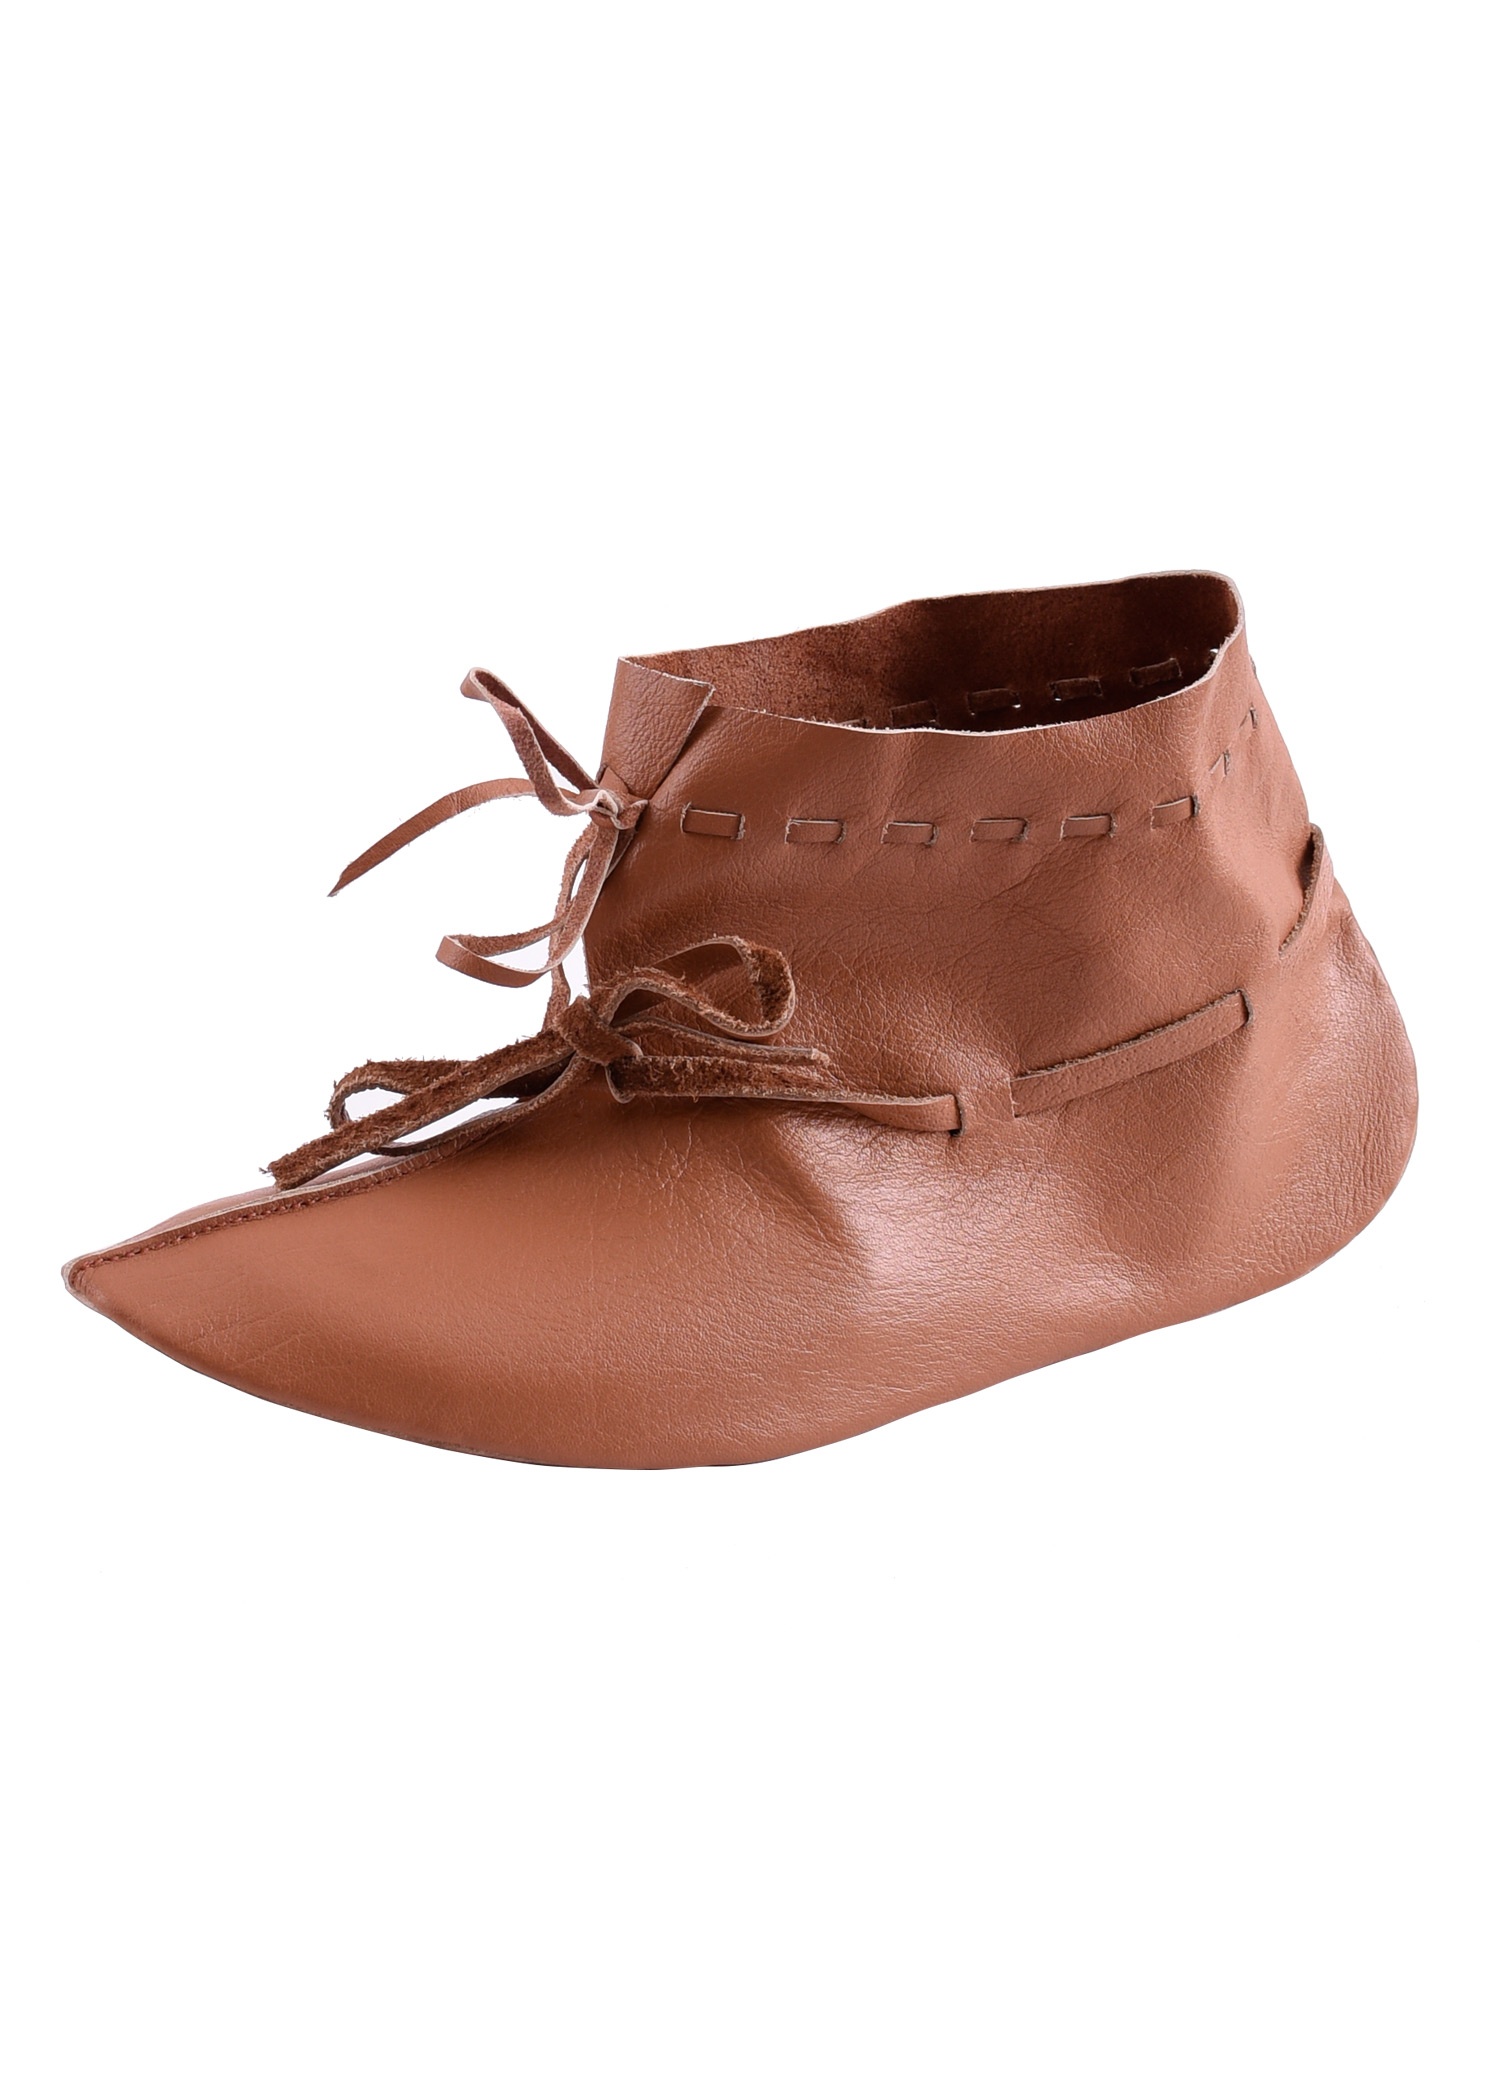 Chaussures de Hedeby type V Chaussures Chaussures homme Chaussures pour déguisement chaussures Viking 